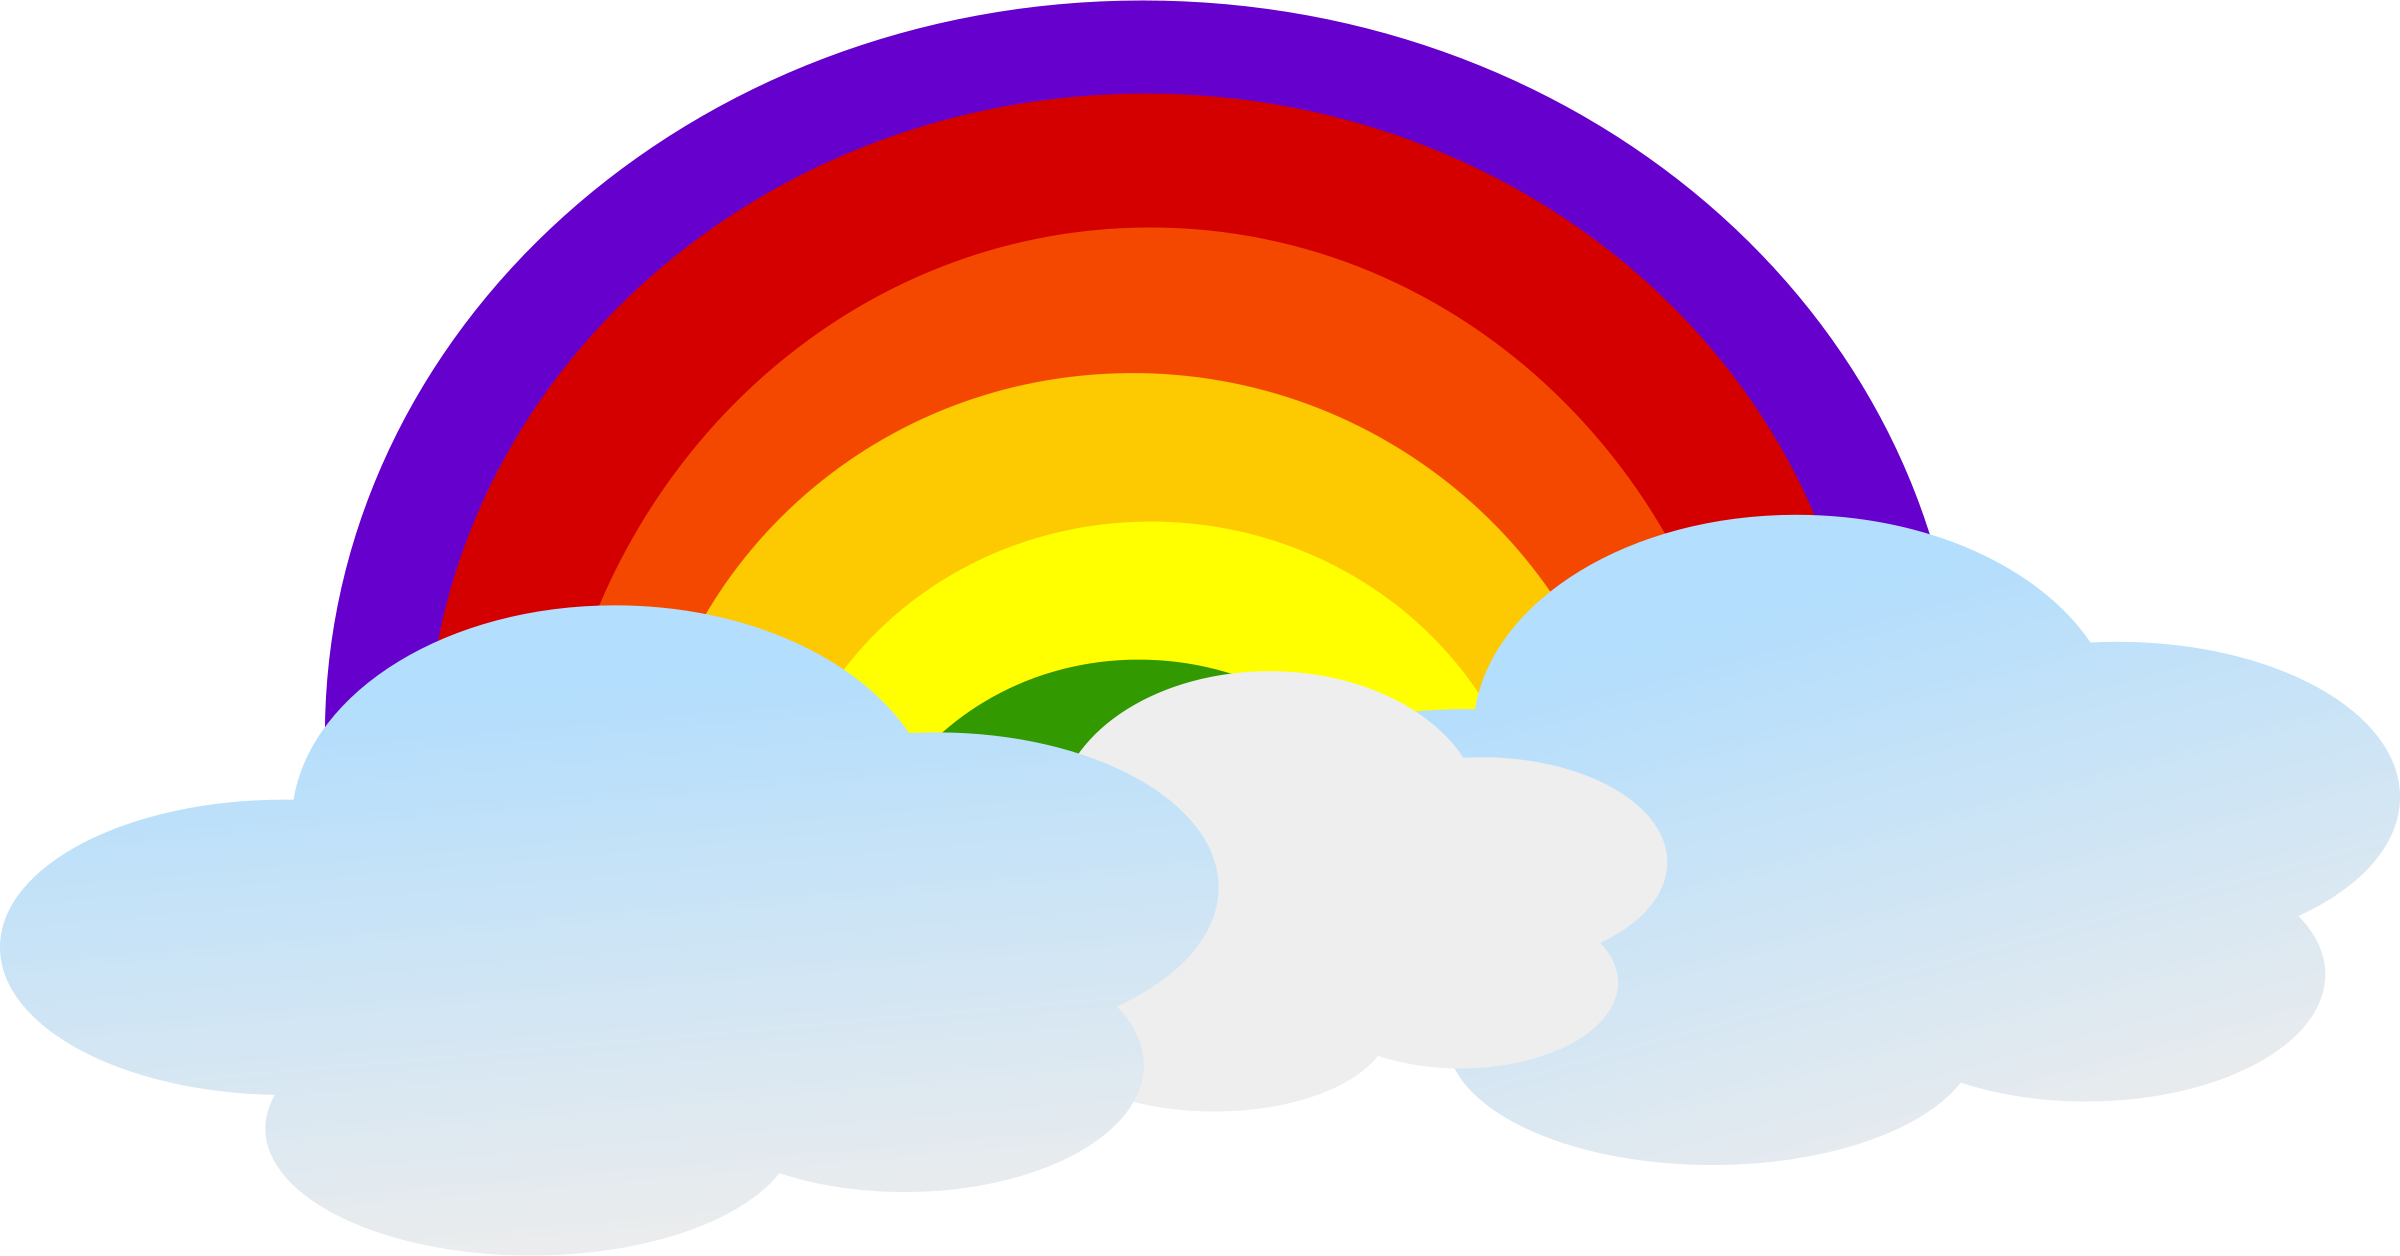 Rainbow Images Images Hd Image Clipart